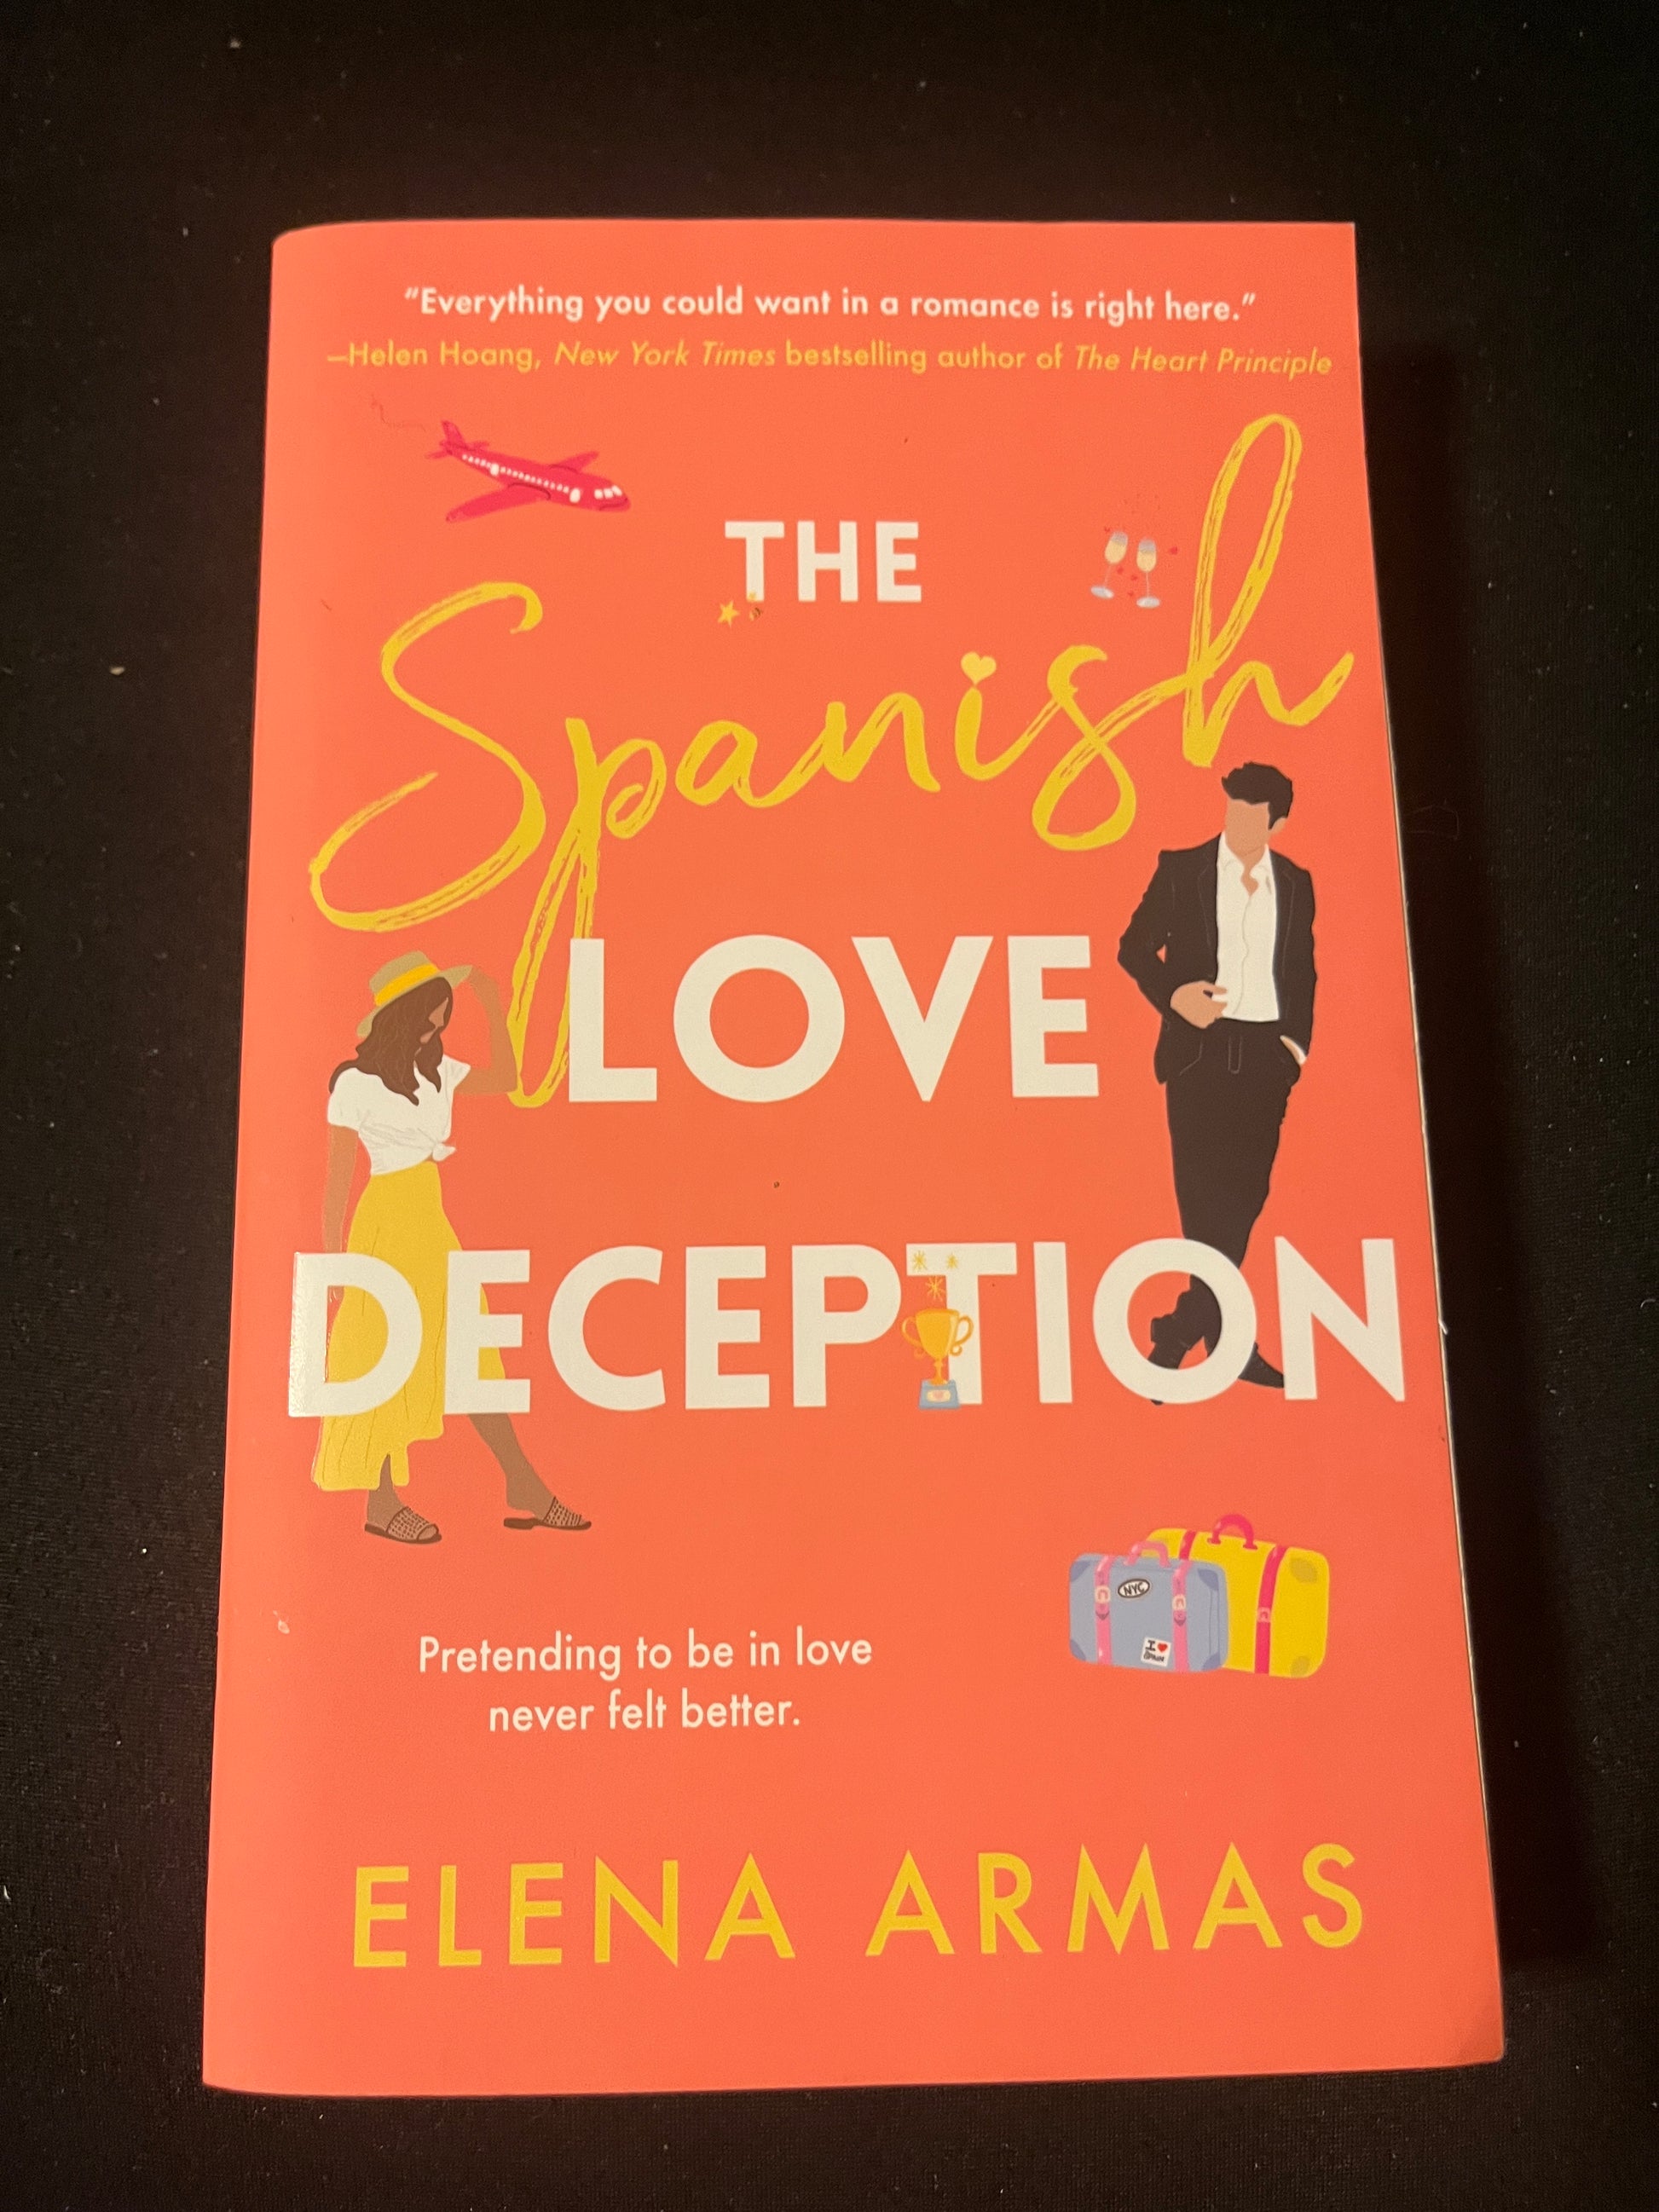 THE SPANISH LOVE DECEPTION by Elena Armas – Liberation is Lit